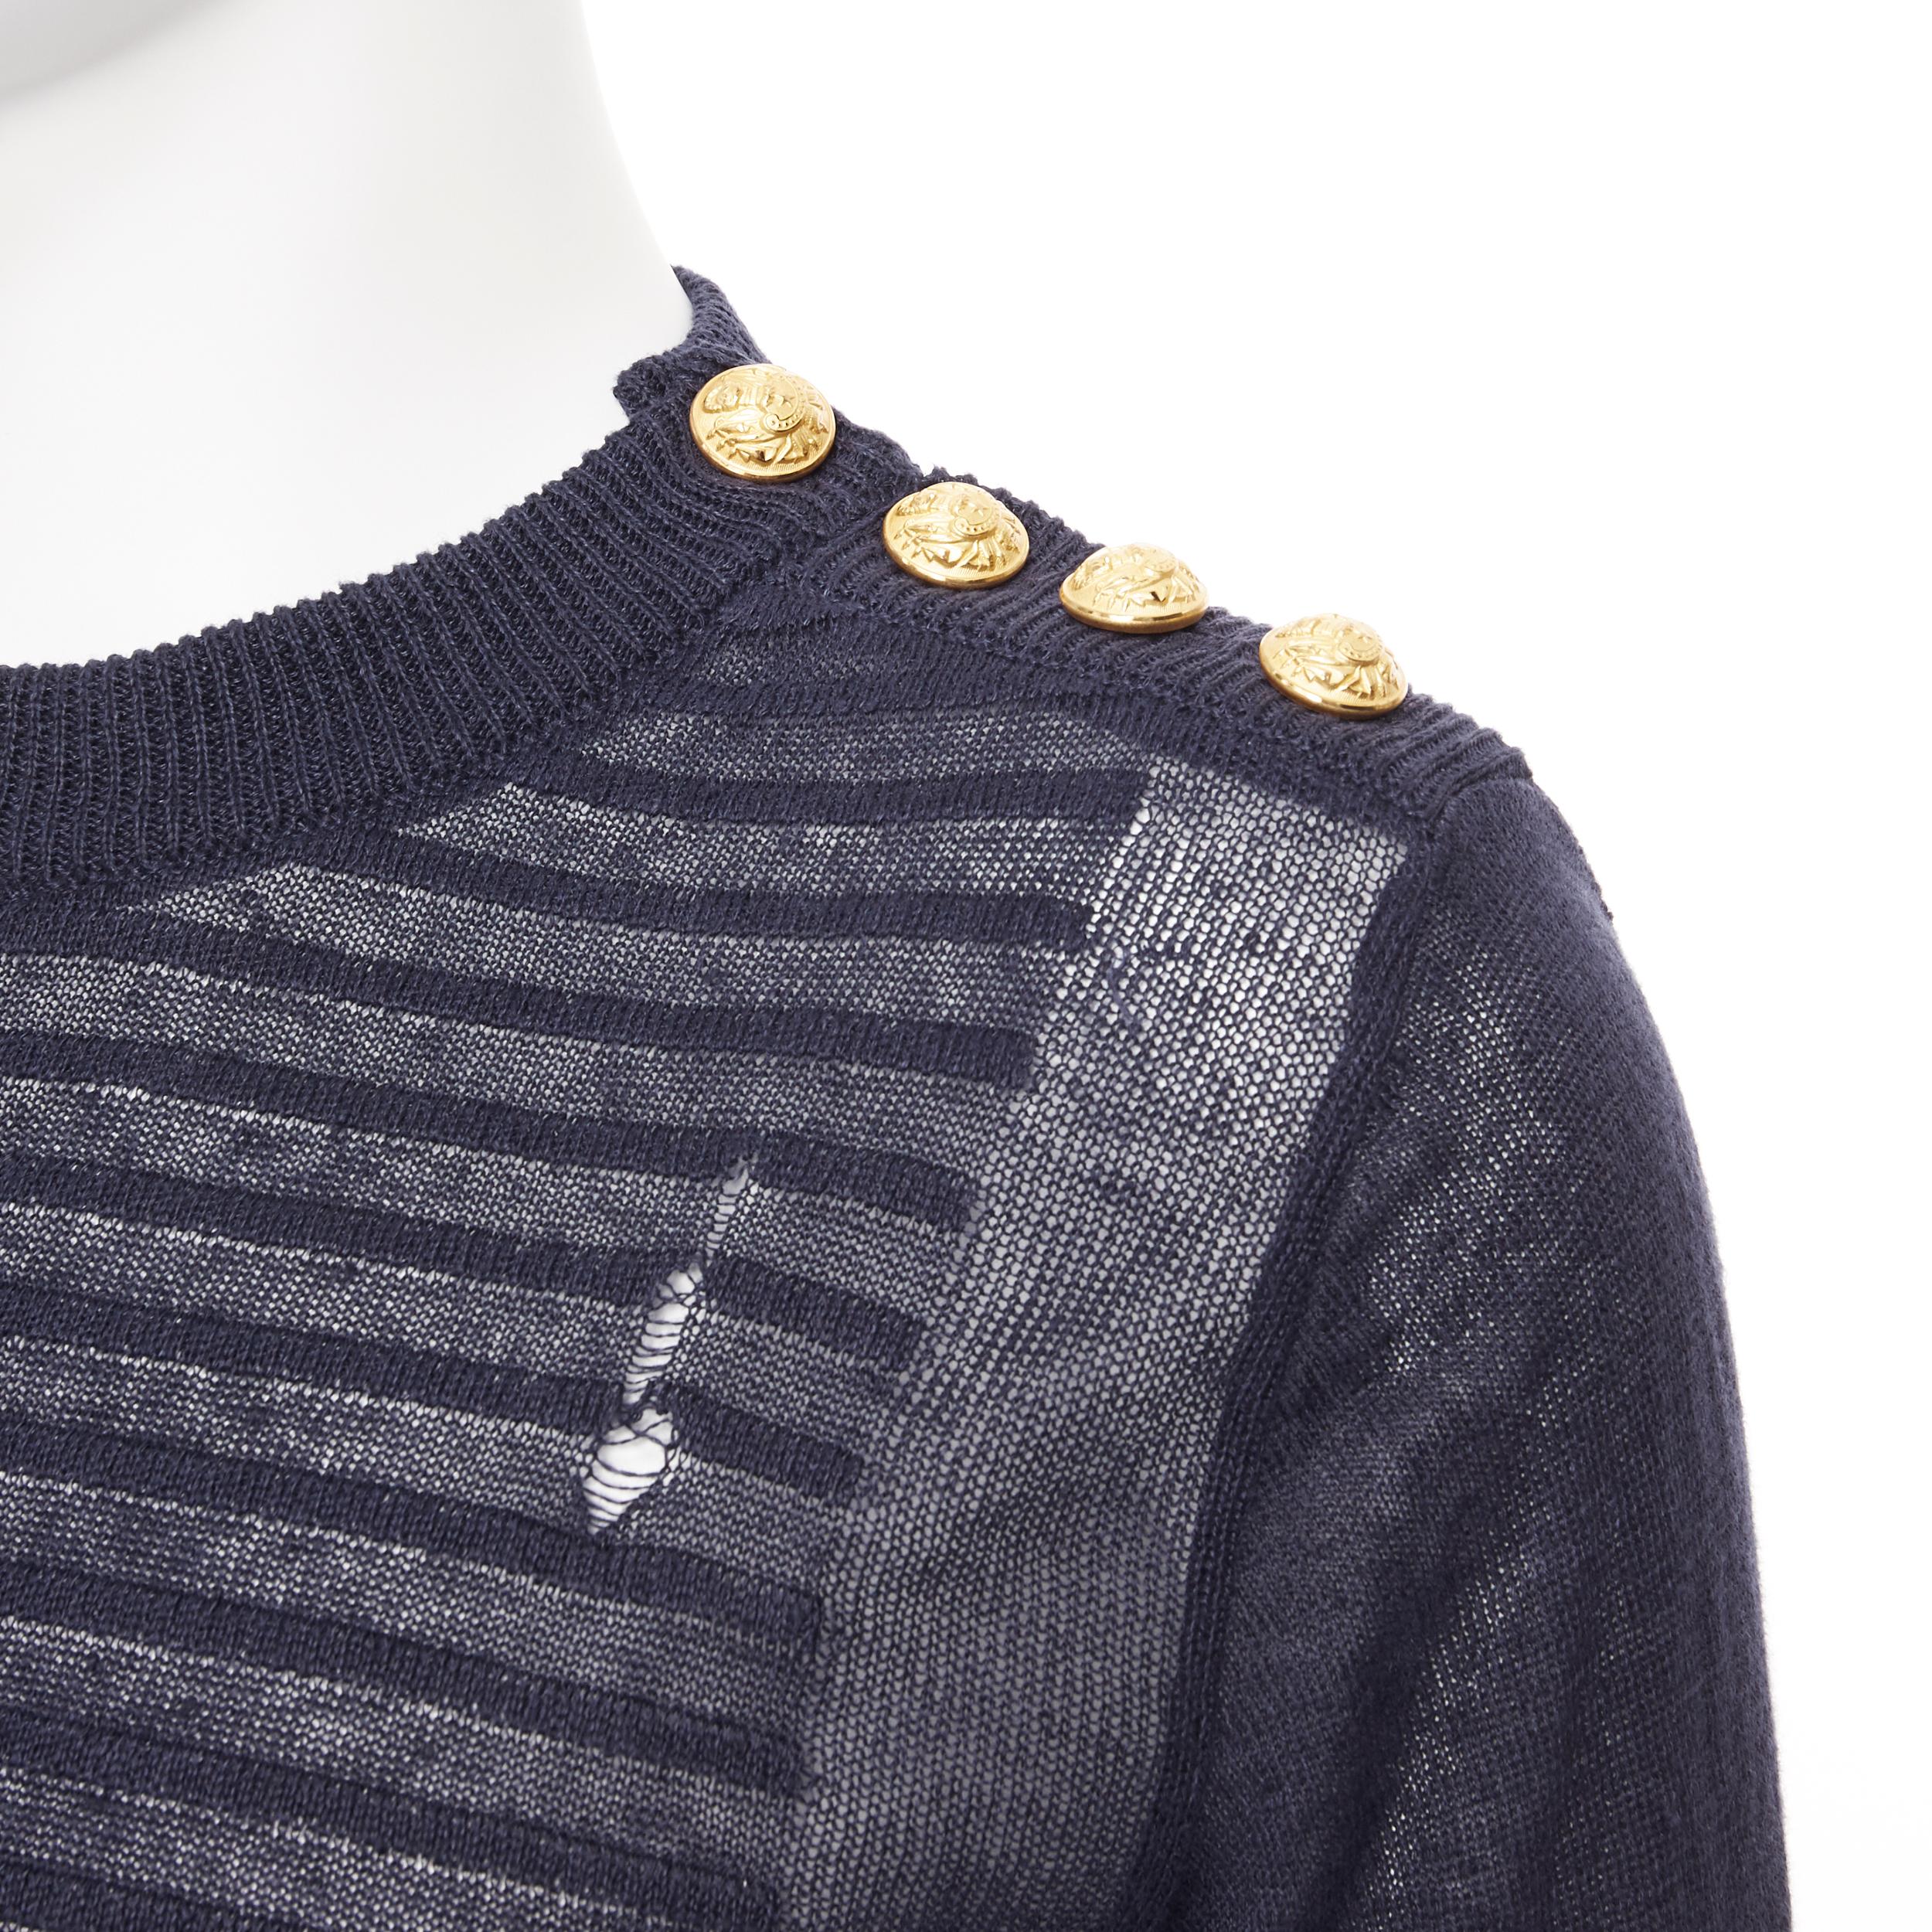 new BALMAIN 100% linen navy stripe gold military button distressed sweater XS
Brand: Balmain
Designer: Olivier Rousteing
Model Name / Style: Distressed sweater
Material: Linen
Color: Black
Pattern: Striped
Extra Detail: BALMAIN style code: